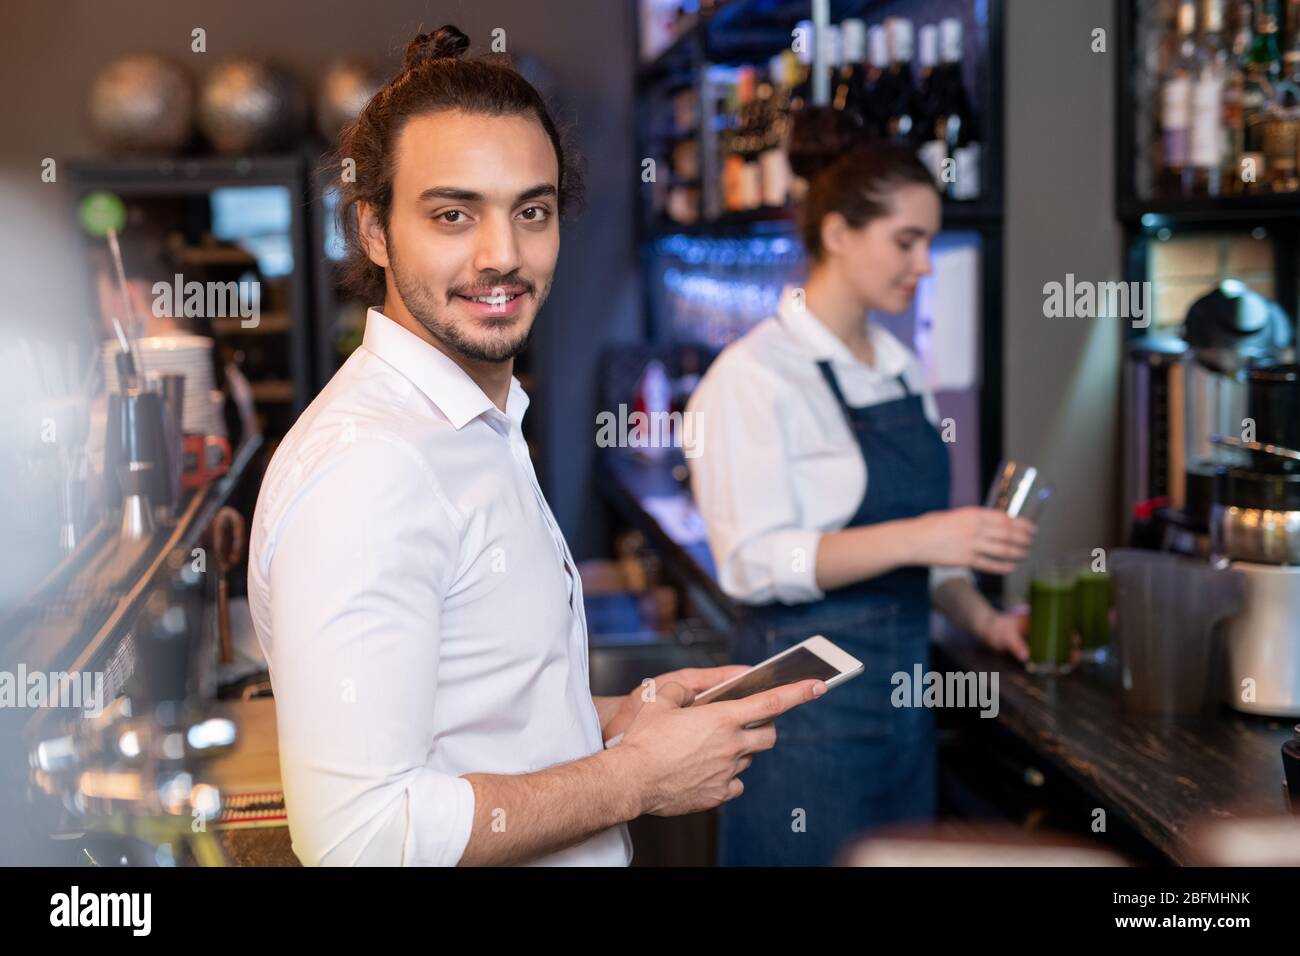 Young friendly waiter in white shirt scrolling through online menu while checking prices for drinks and food on background of colleague Stock Photo